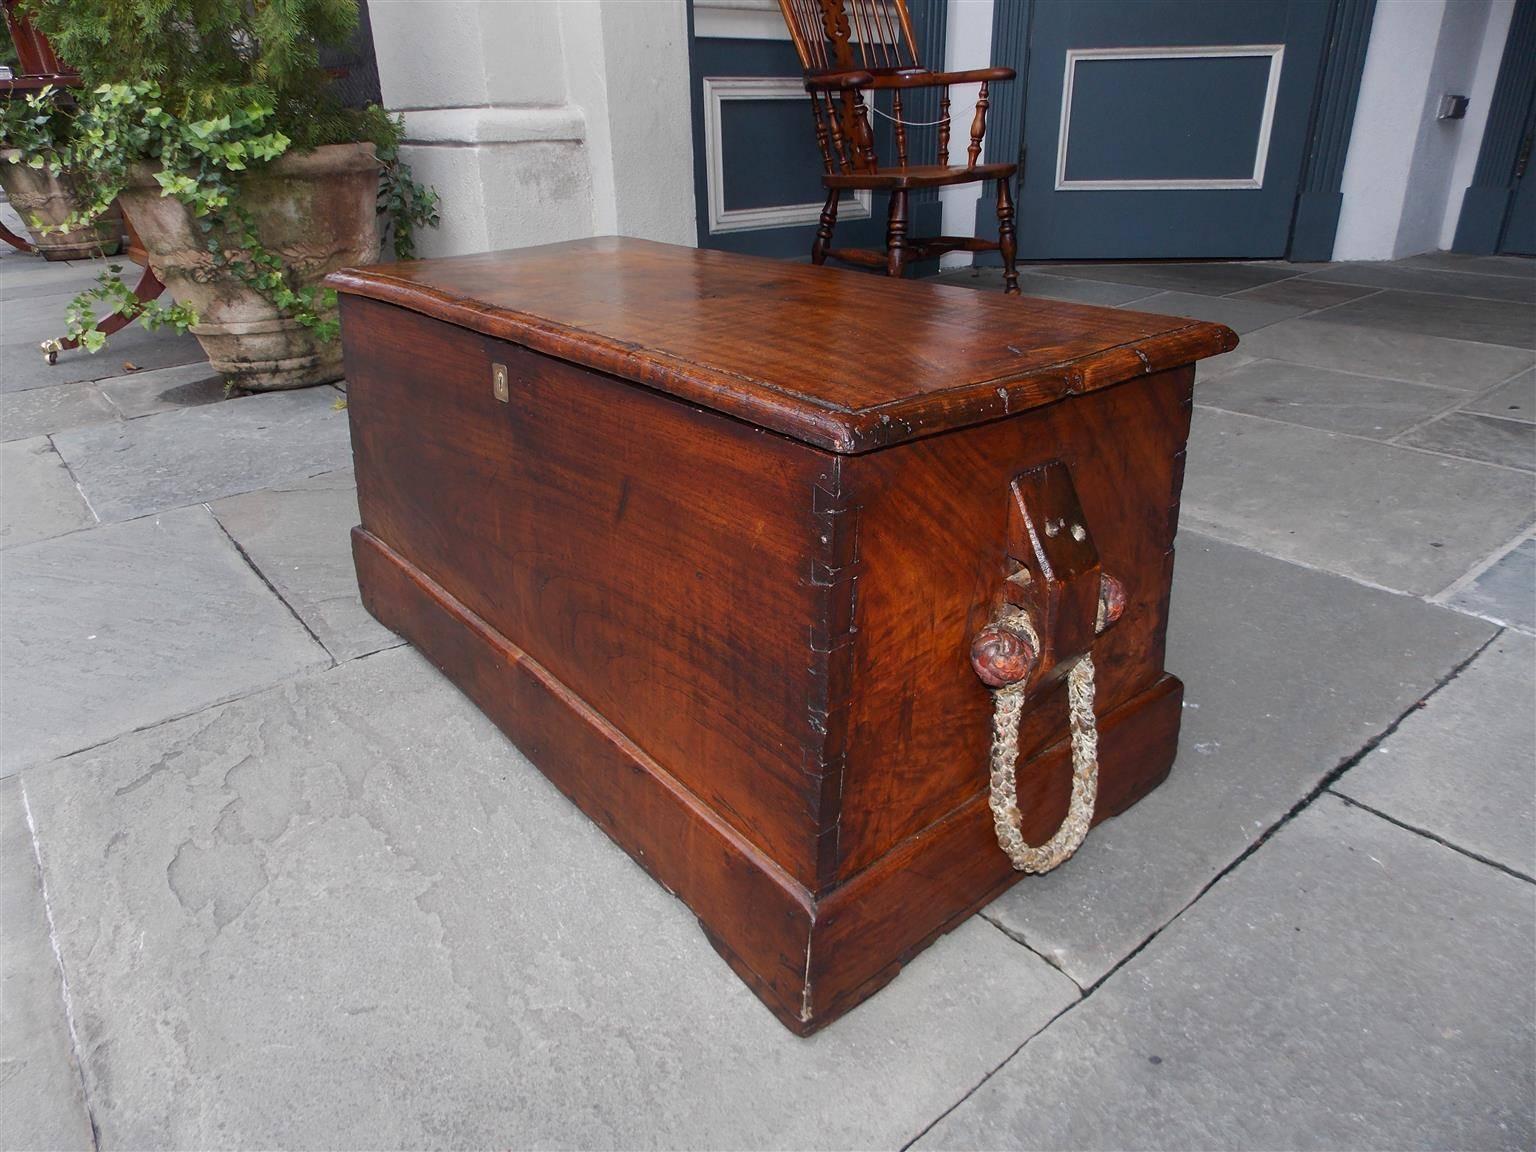 English Camphor wood sea captain's chest with hinged top, exposed corner dovetailing, original mounted braided beckets, and terminating on the original rectangular molded edge  base. Chest is finished on all sides & rope beckets are fabulous. Late